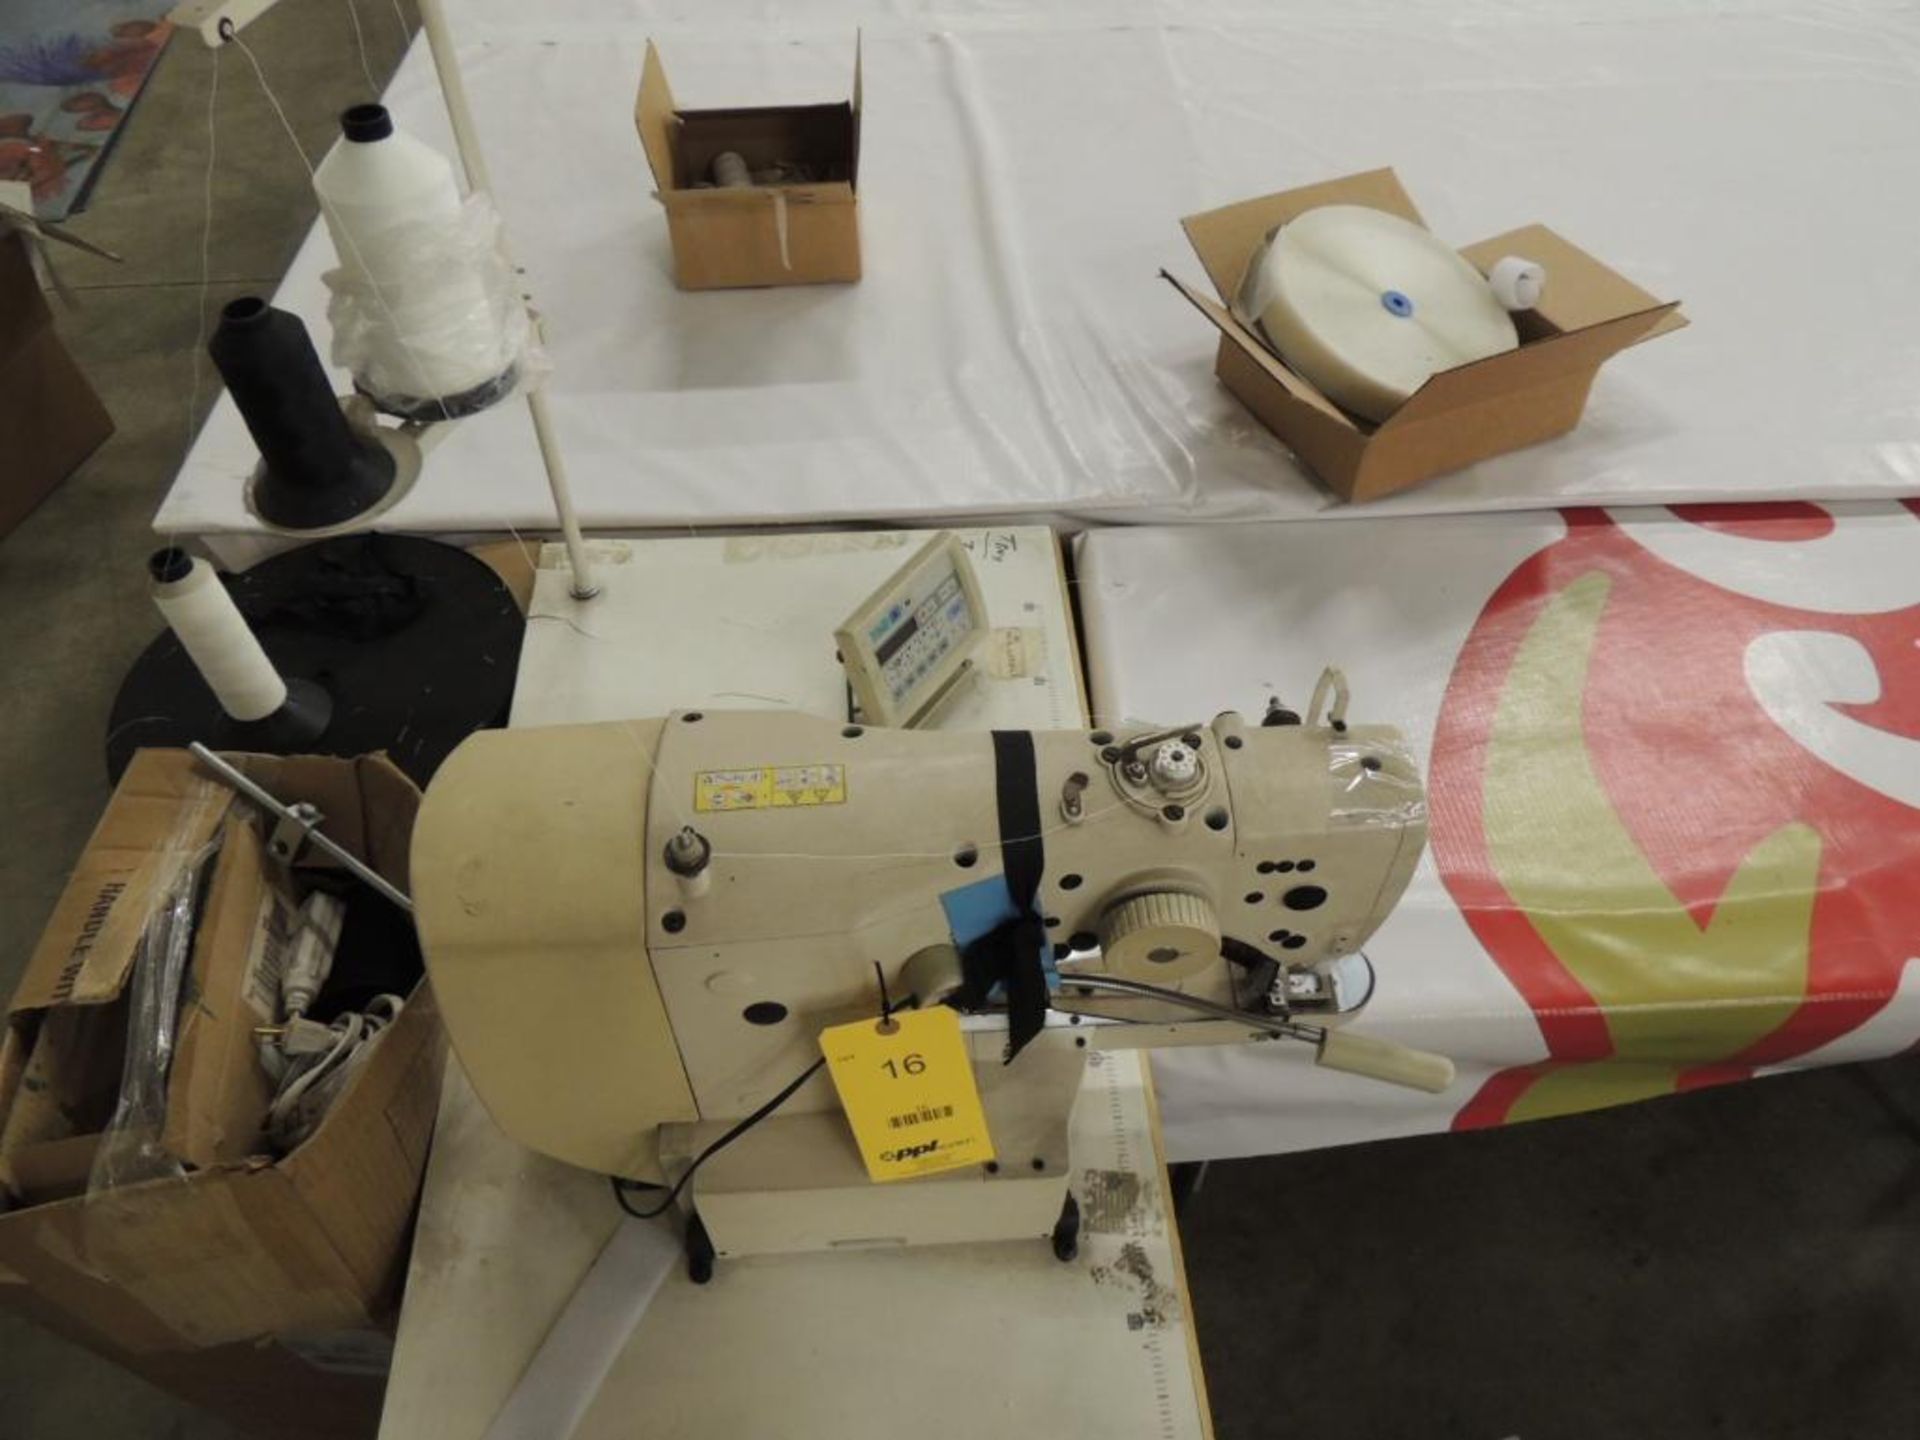 King Max GT1900A Sewing Machine with Digital Controller, on Table - Image 2 of 2